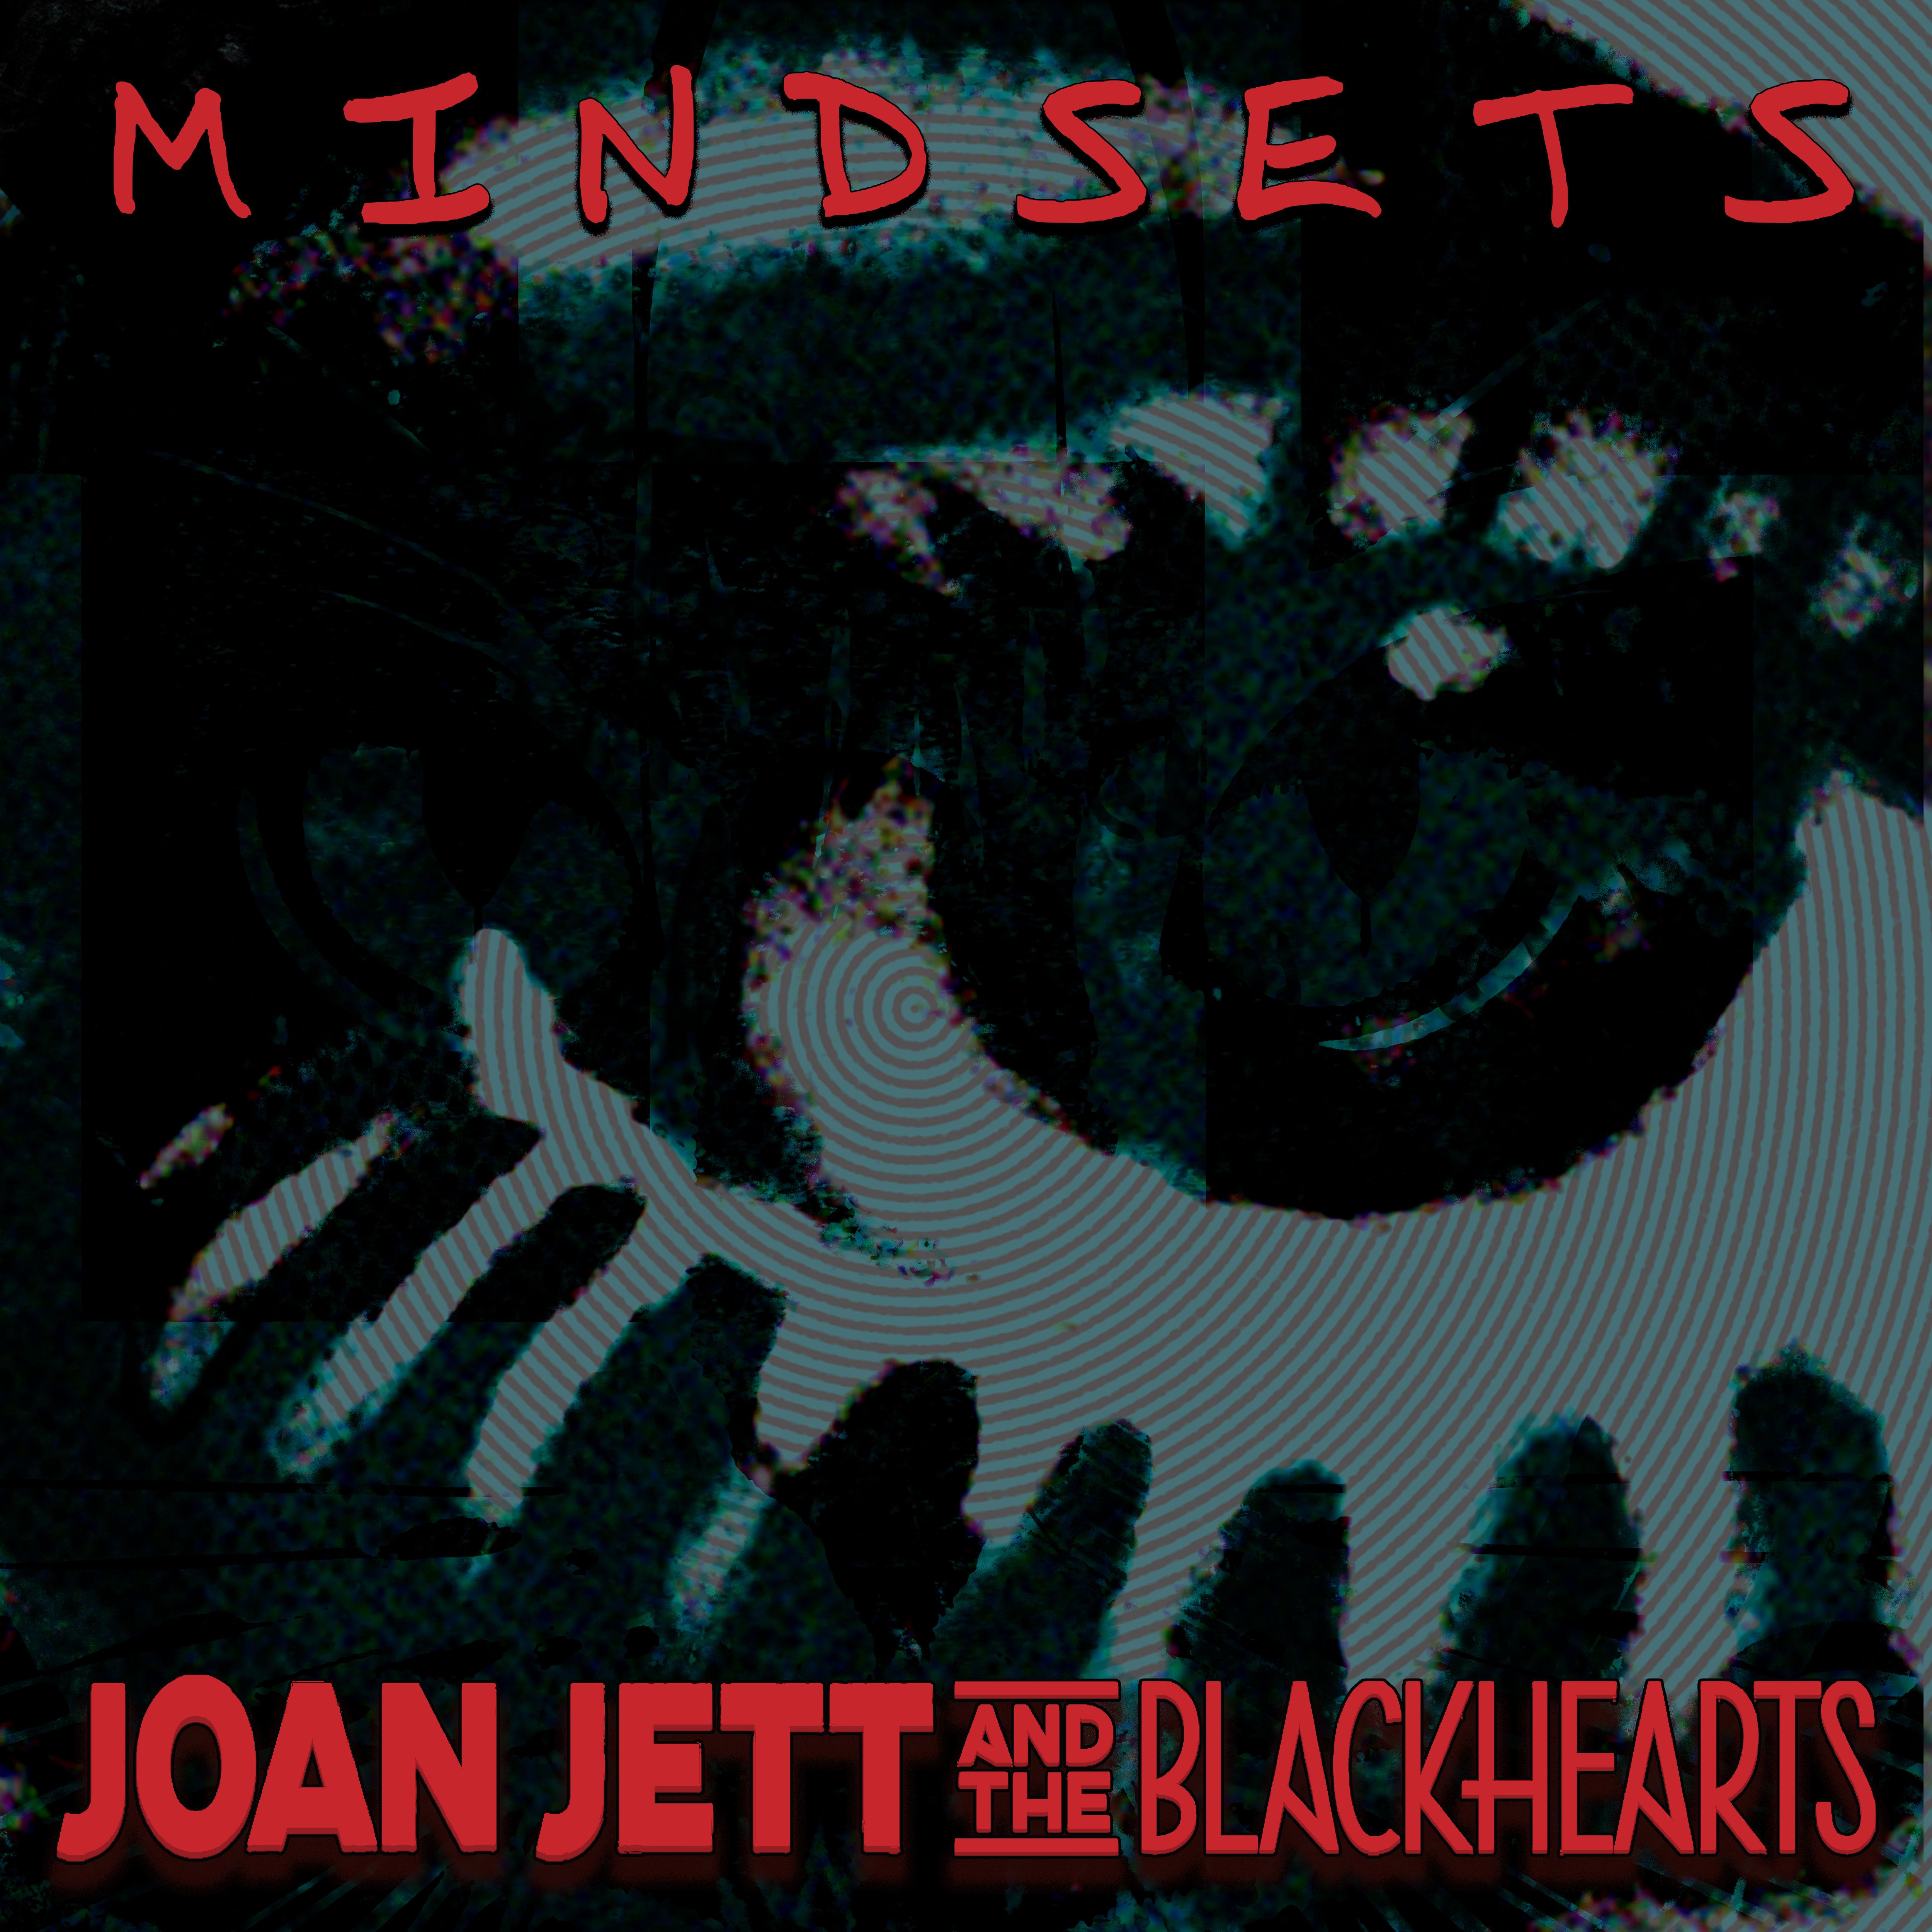 Joan Jett and the Blackhearts release new EP, "Mindsets"